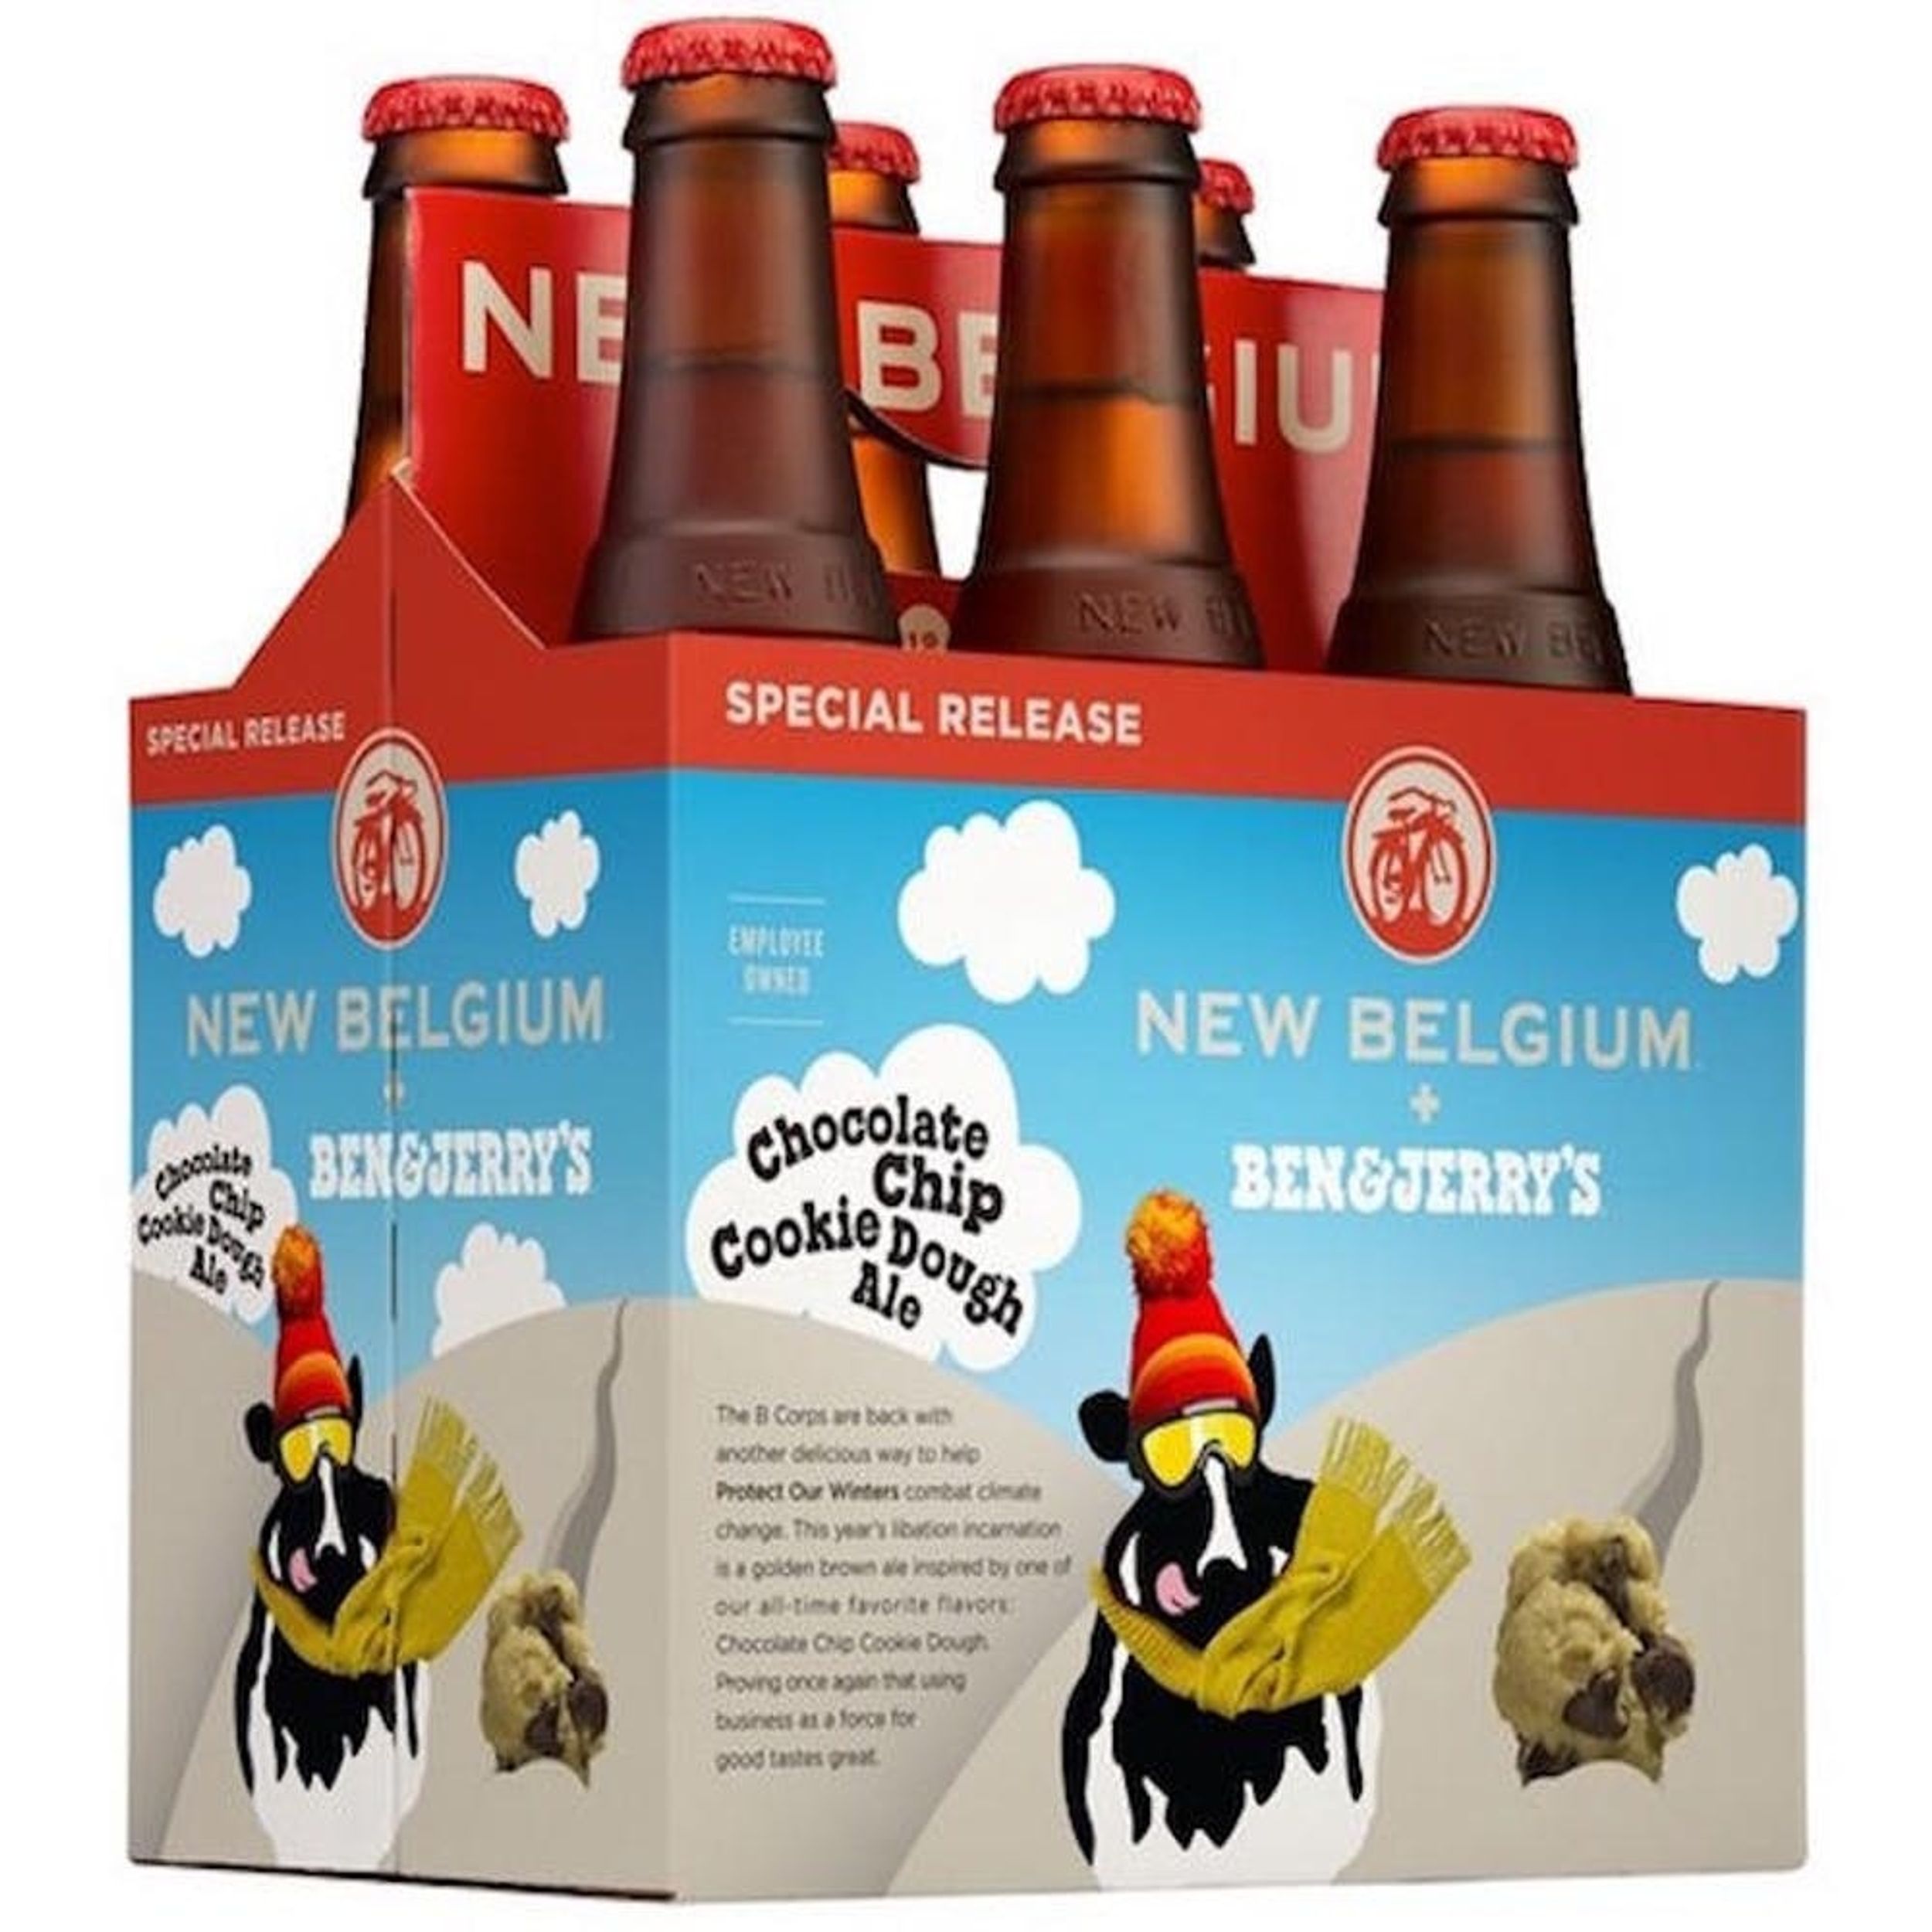 You Have to Check Out This Ben & Jerry’s Cookie Dough Ice Cream BEER